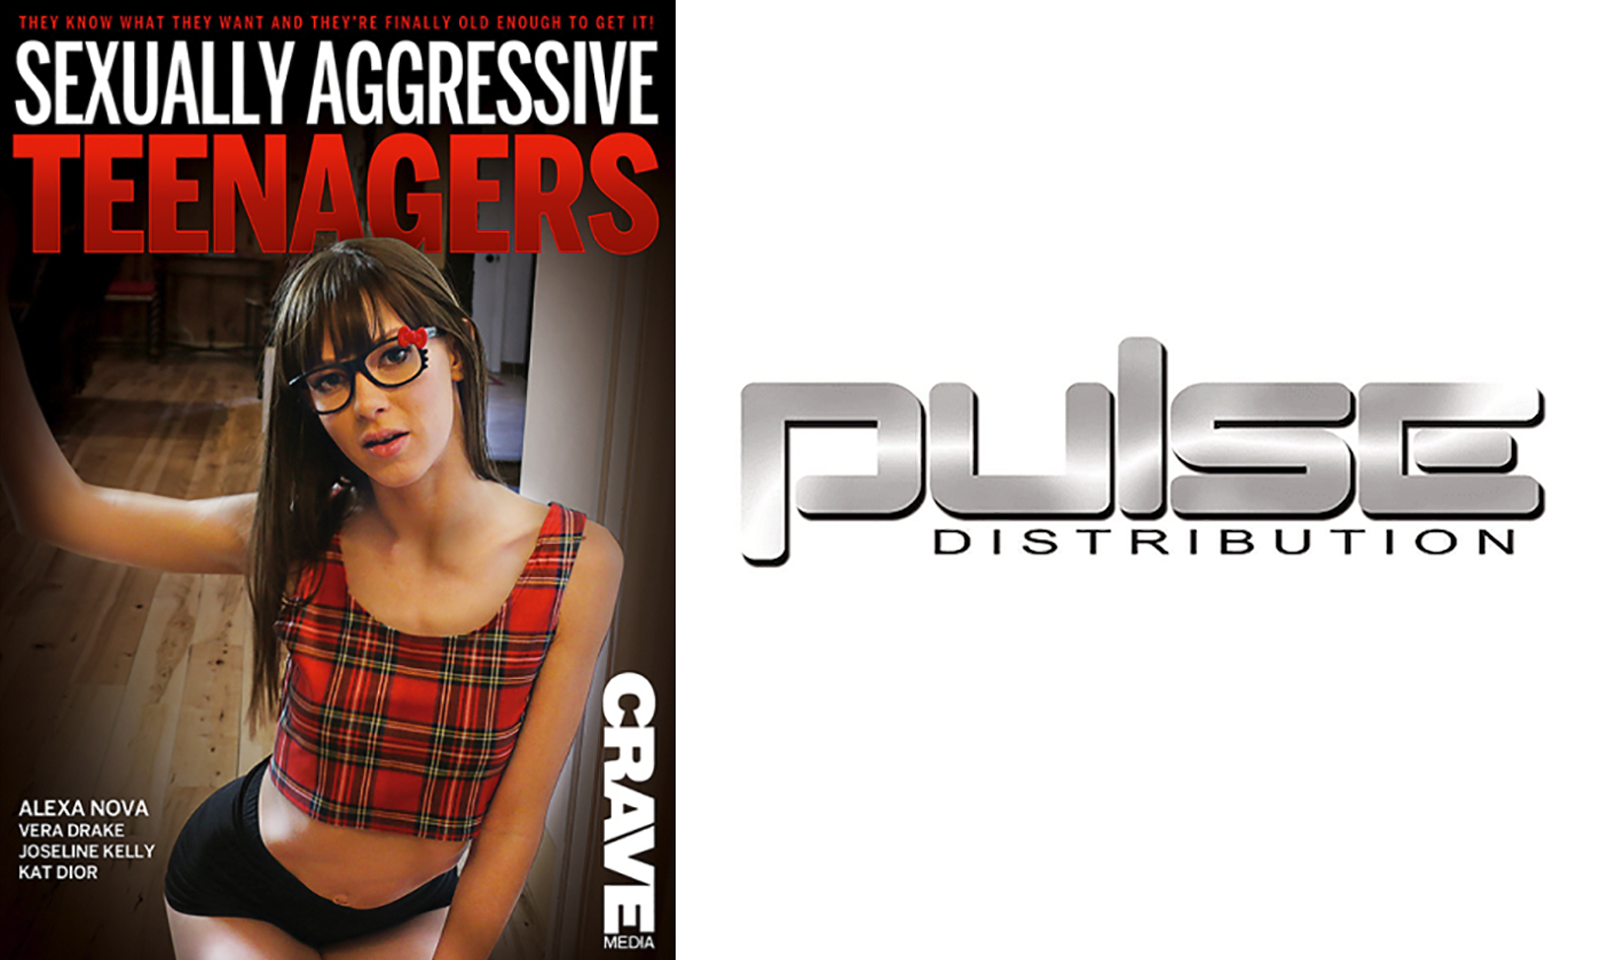 Crave Media's ‘Sexually Aggressive Teenagers’ Shipping from Pulse